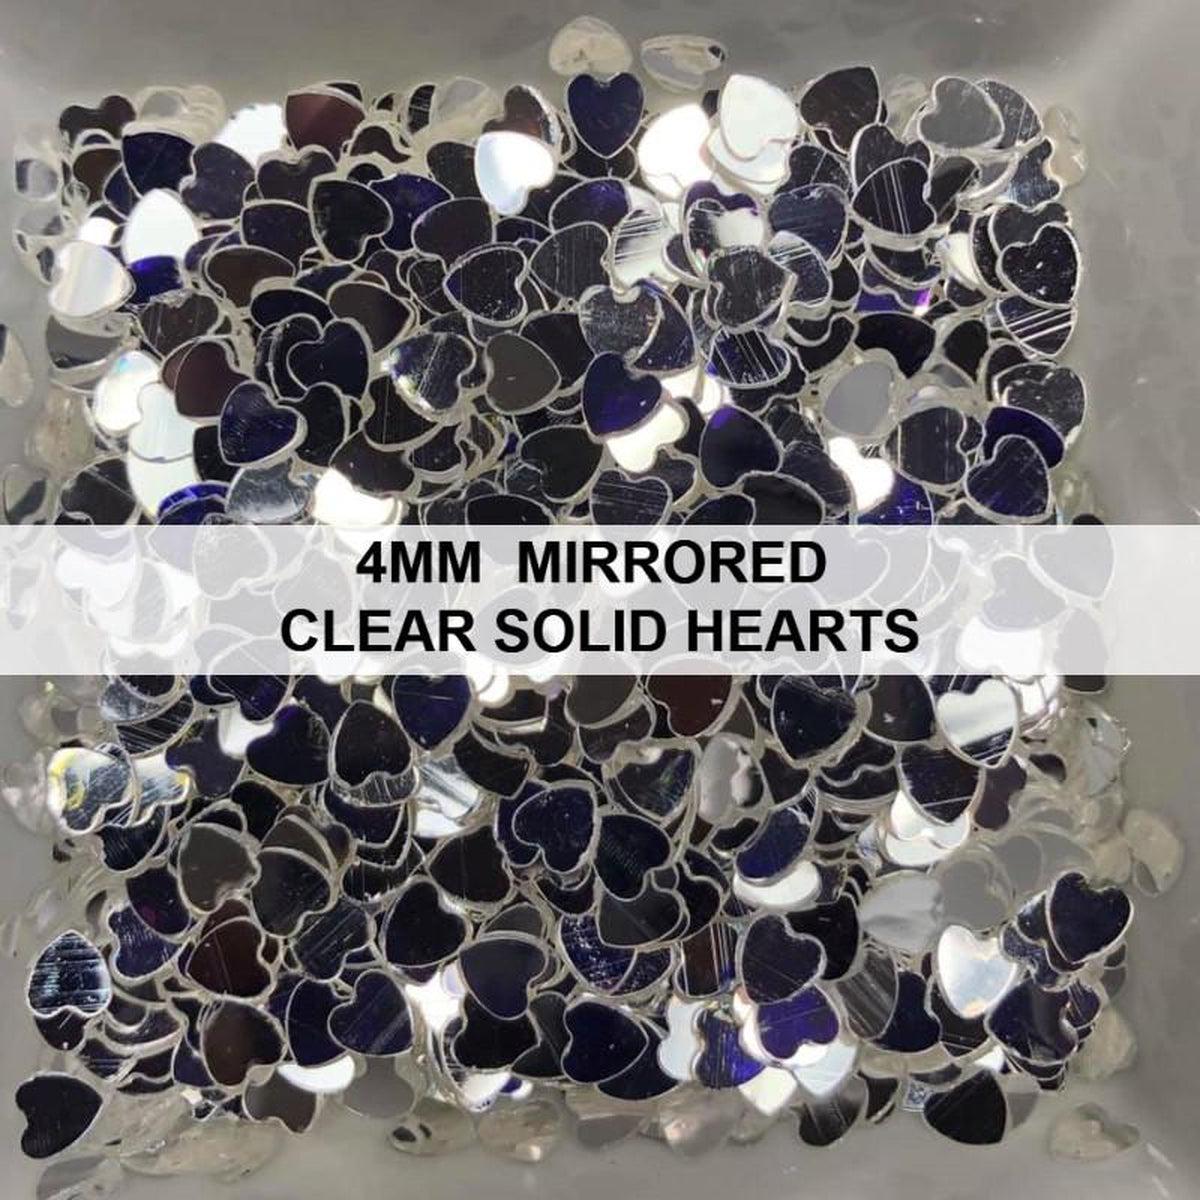 4mm Mirrored Clear Solid Heart Sequins - Kat Scrappiness